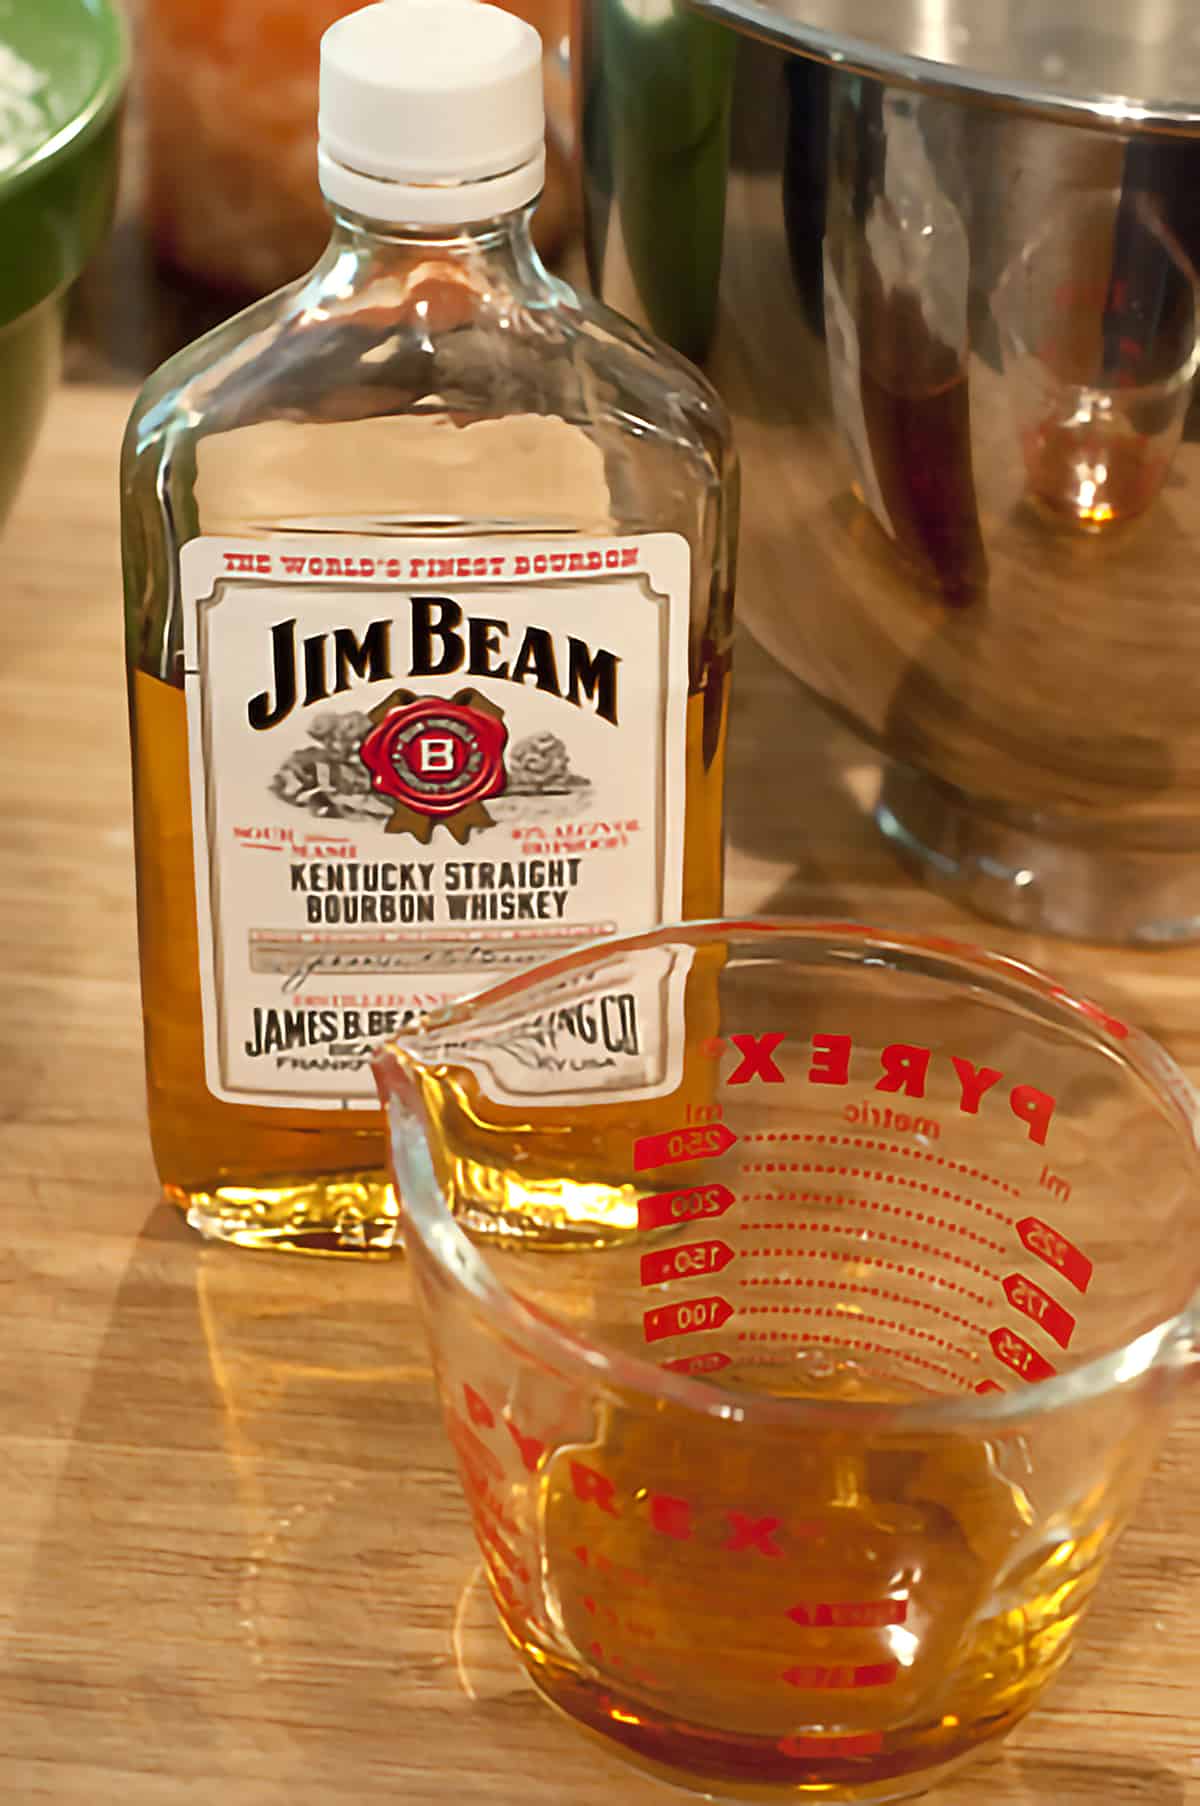 A bottle of Jim Beam Straight Bourbon Whiskey and a measuring cup containing whiskey for the recipe.